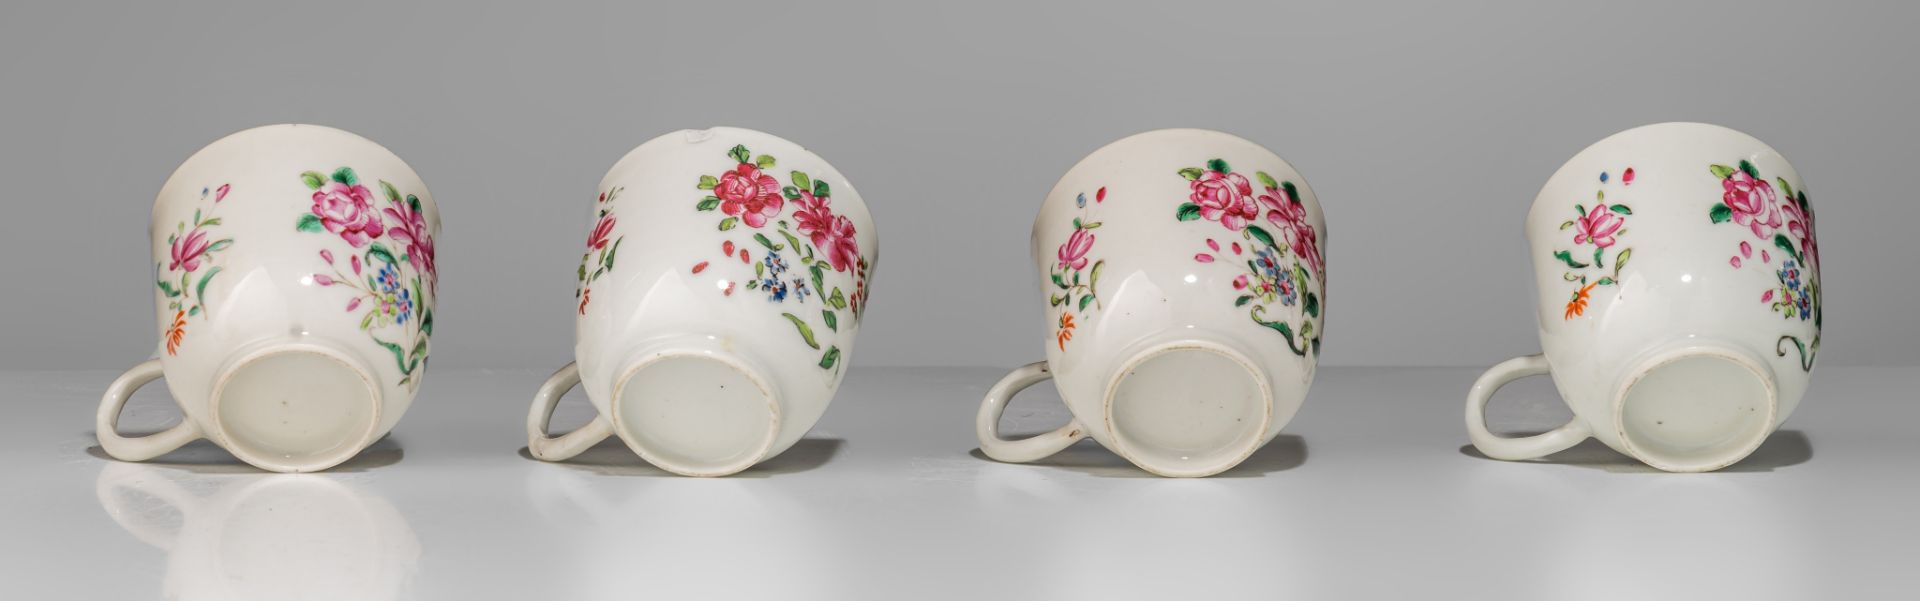 A collection of famille rose and gilt decorated export porcelain ware, 18thC, largest - H 12,5 - 34, - Image 20 of 20